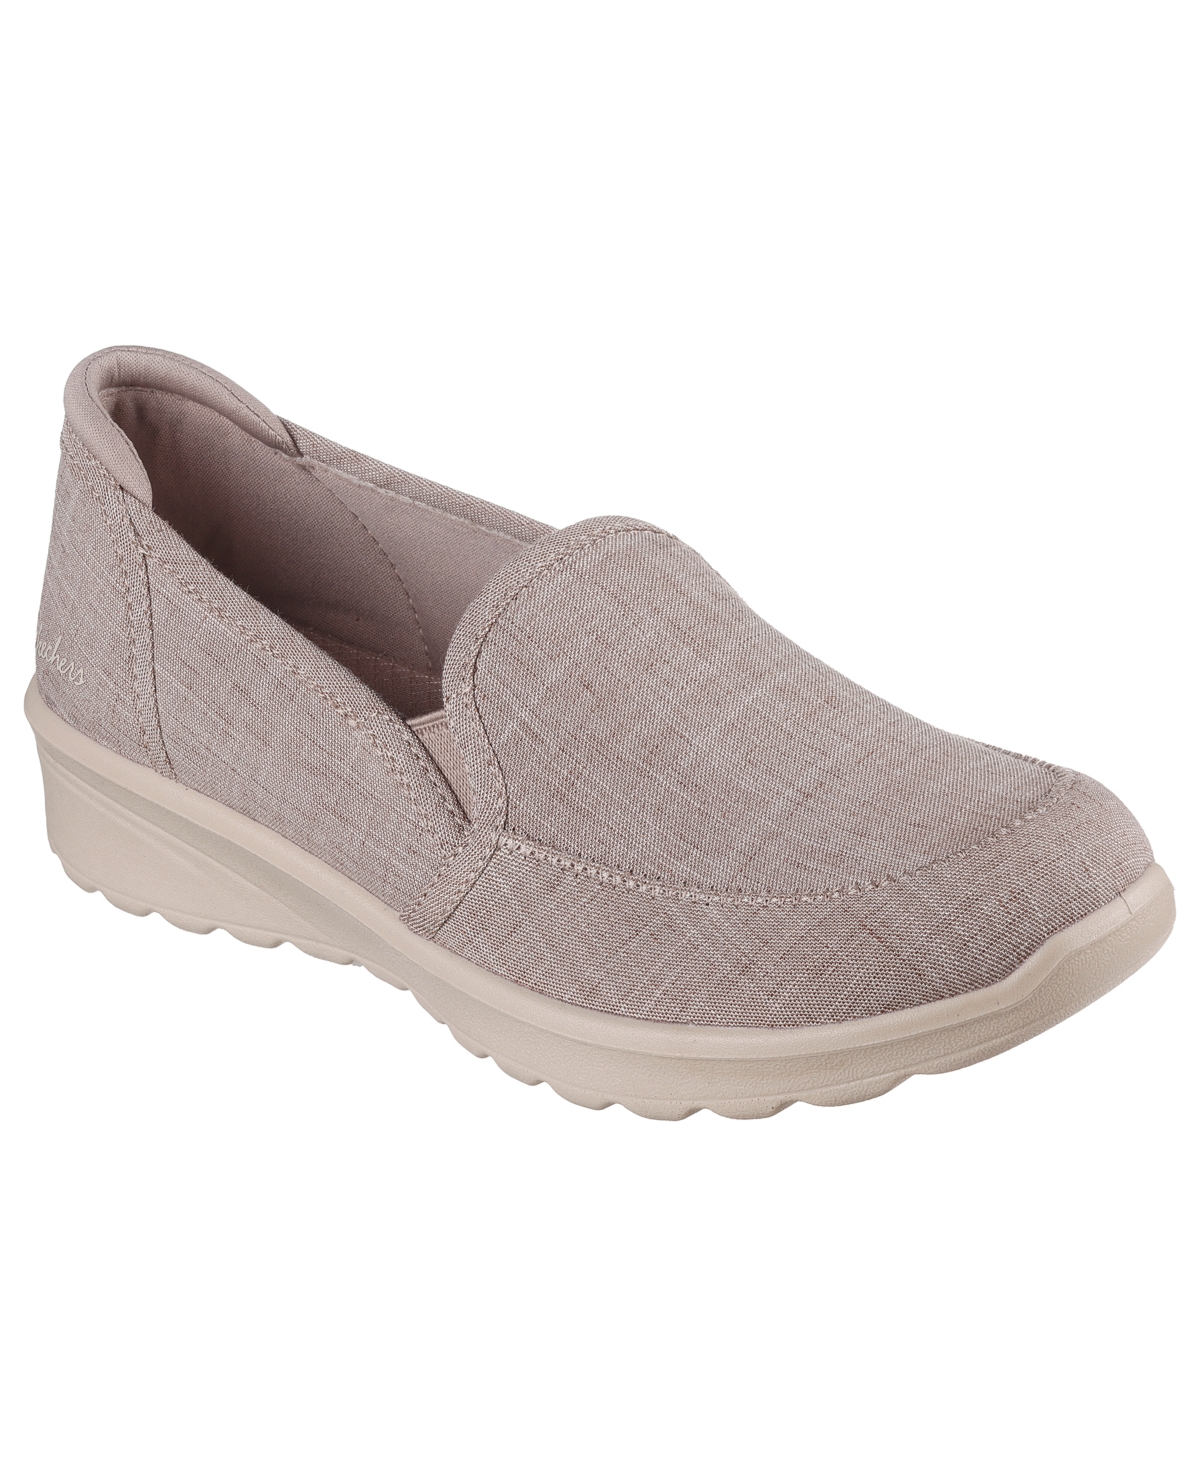 Women's Lovely Vibe Slip-On Casual Sneakers from Finish Line - Nvy-navy